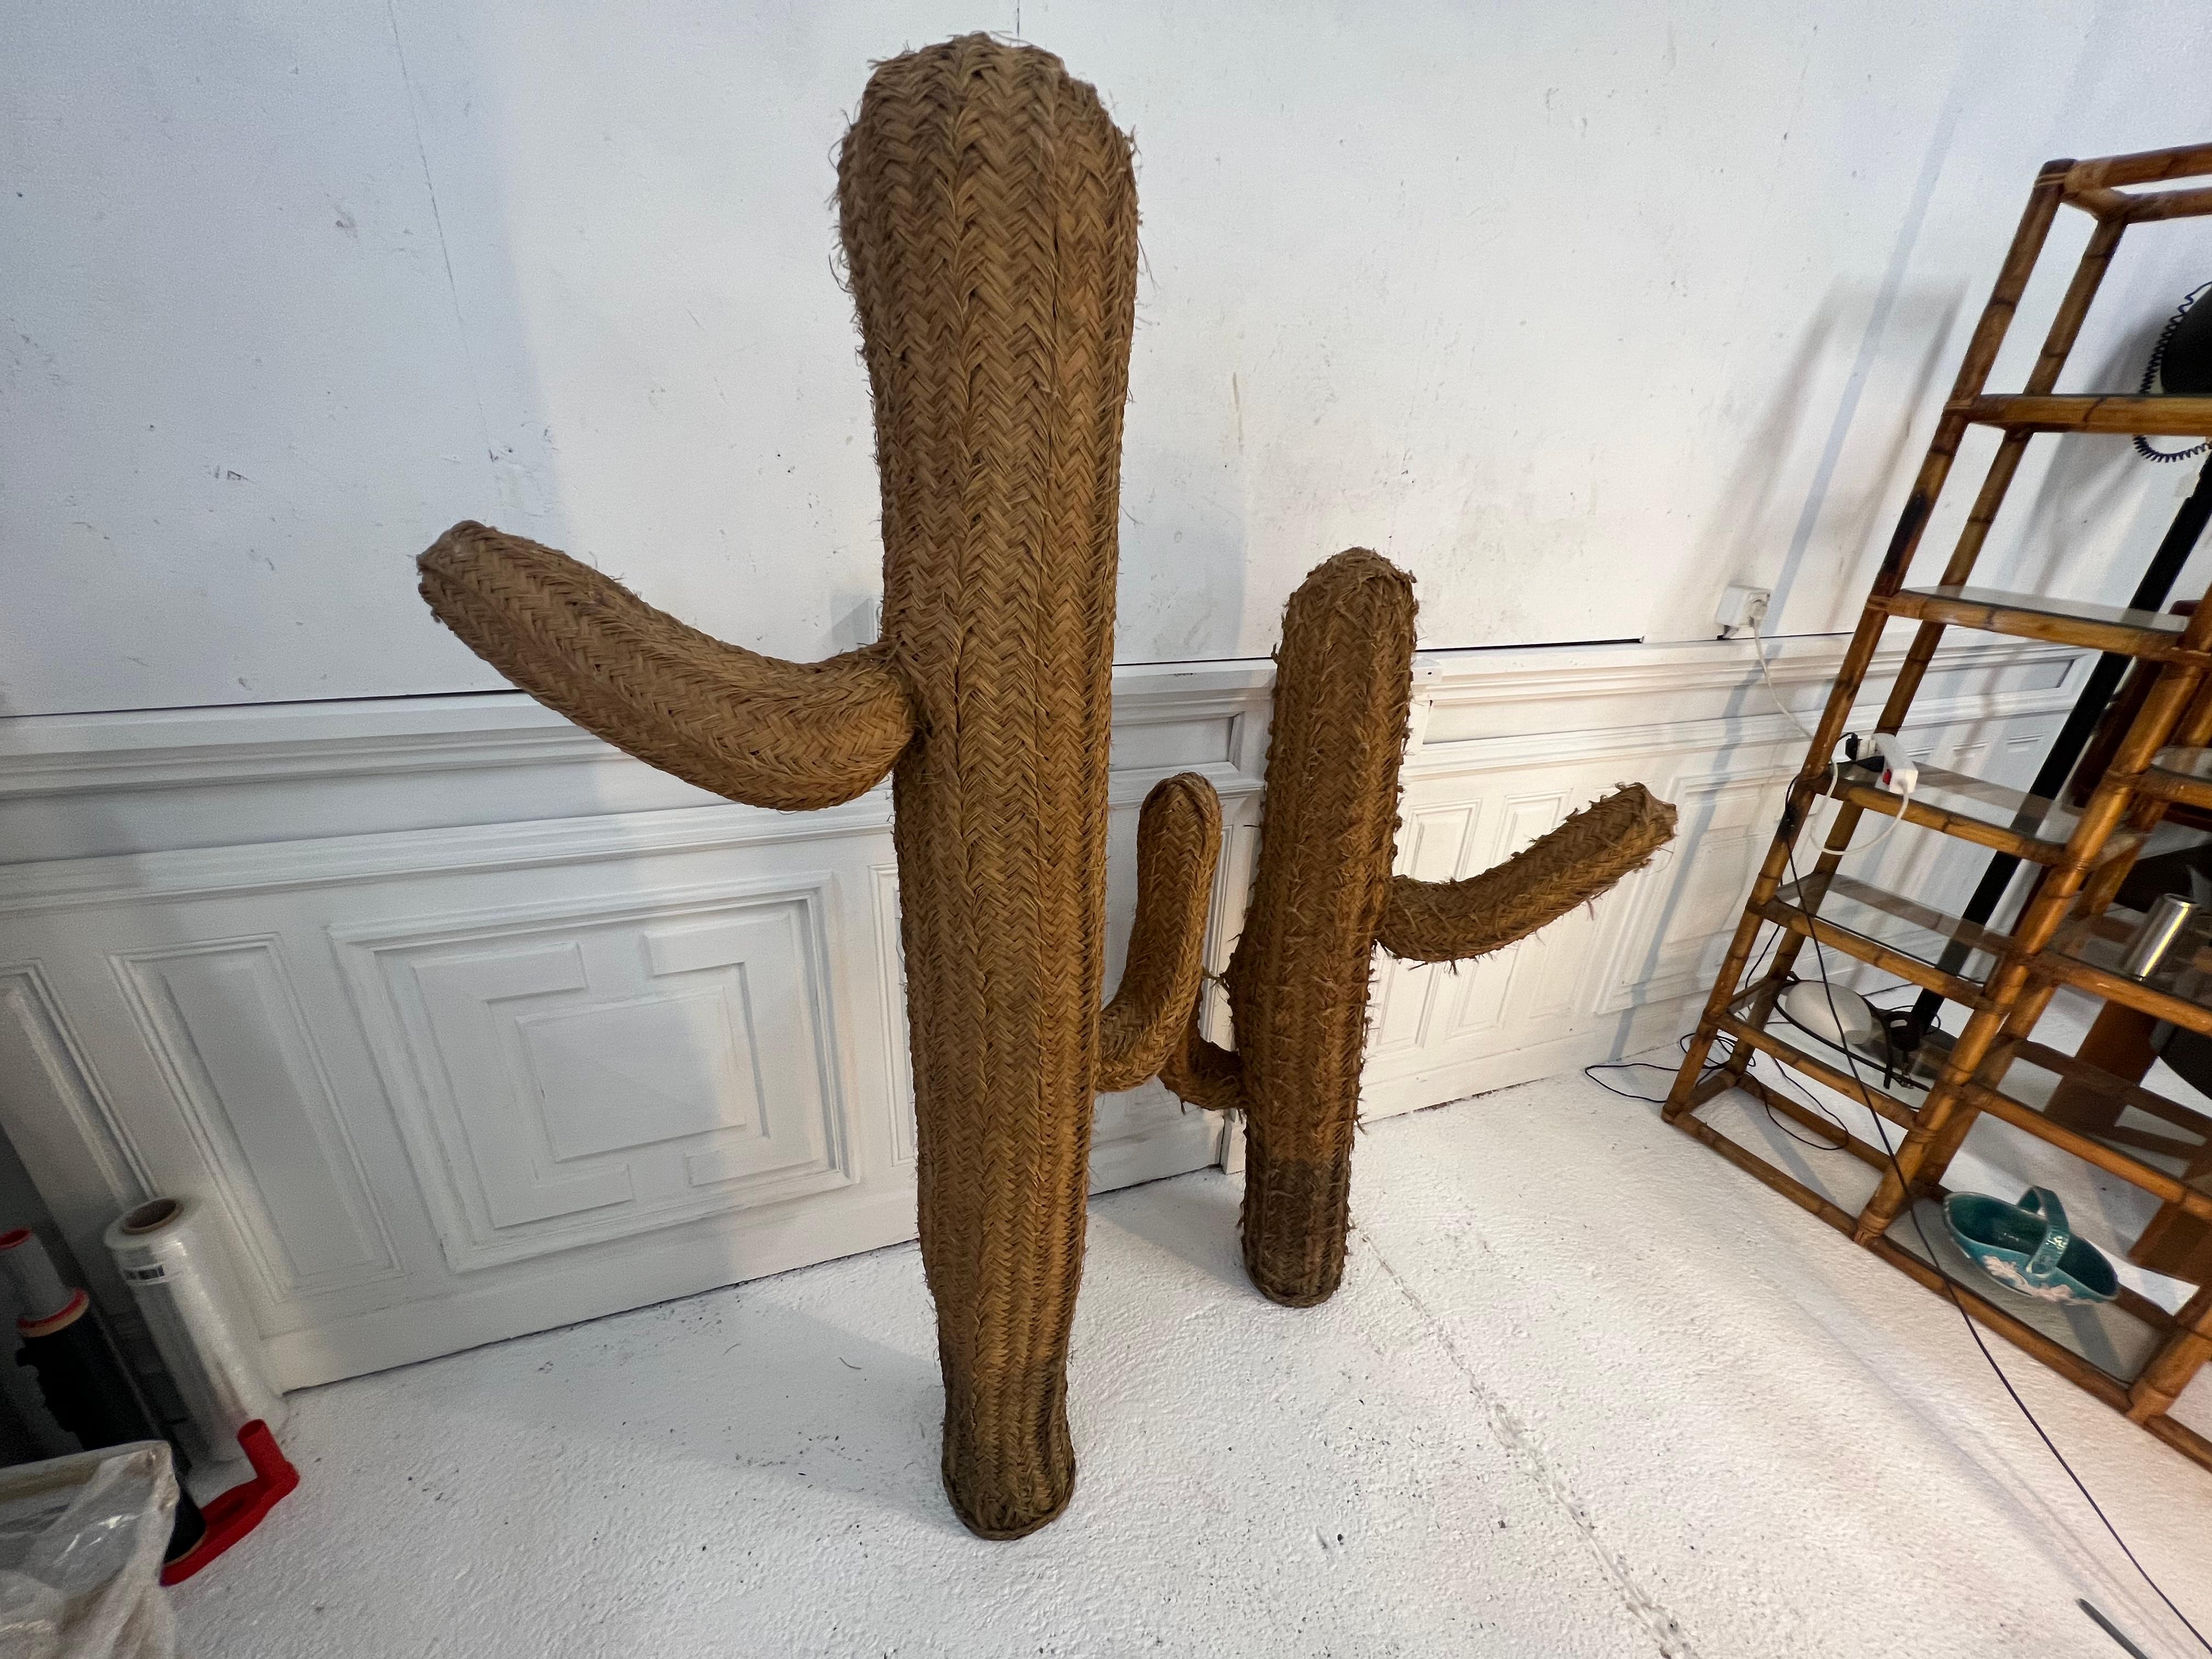 Large Wicker Cactus, 1970s Garden’s Decoration For Sale 1